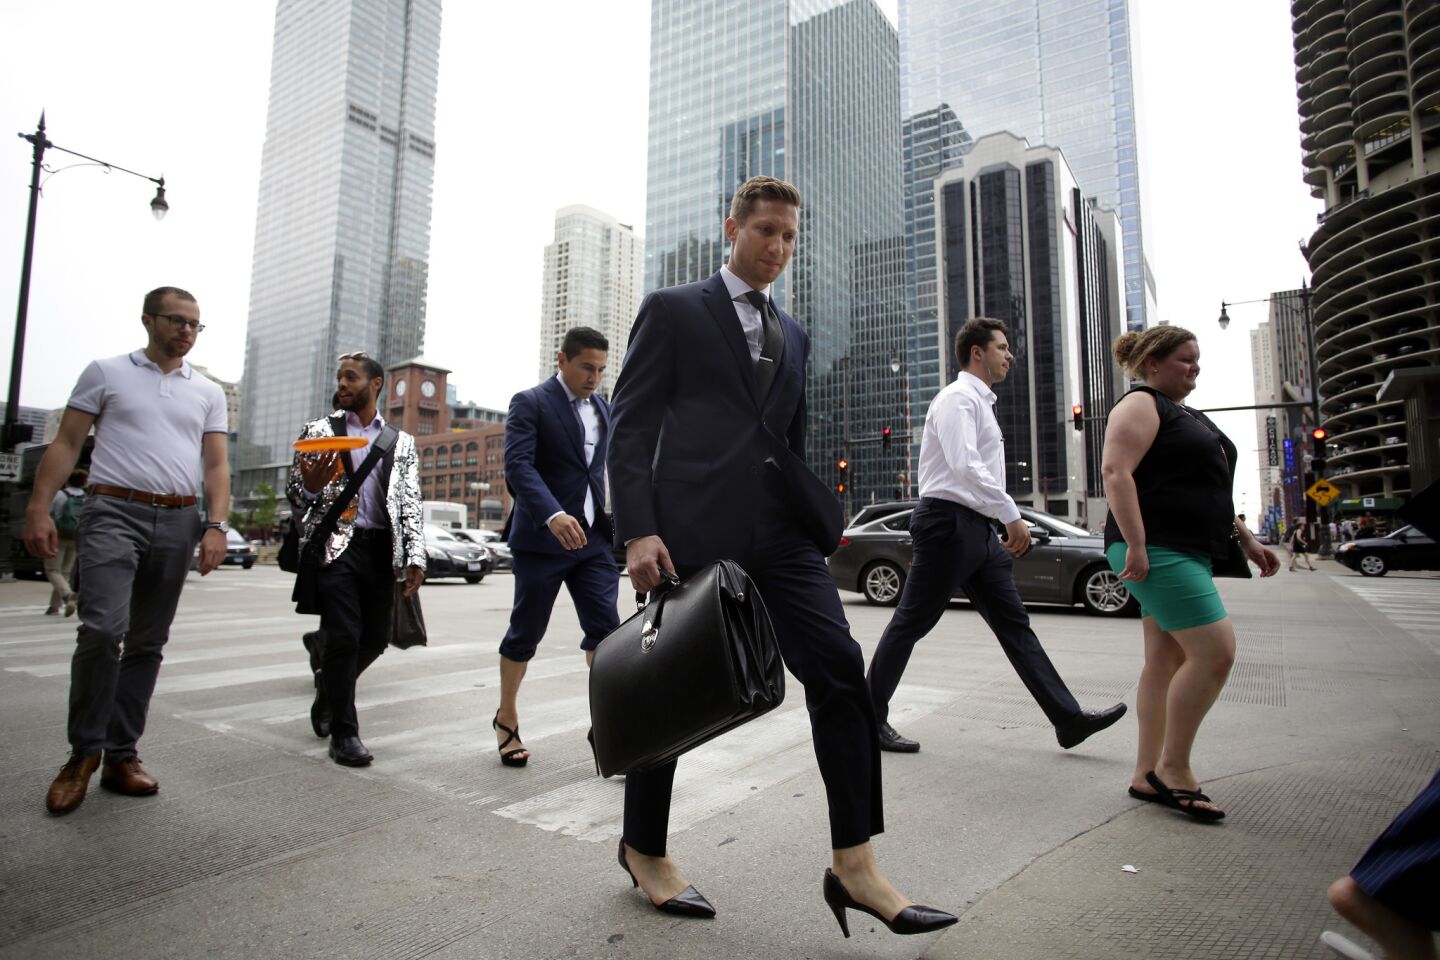 Chicago's Walk a Mile in Her Shoes